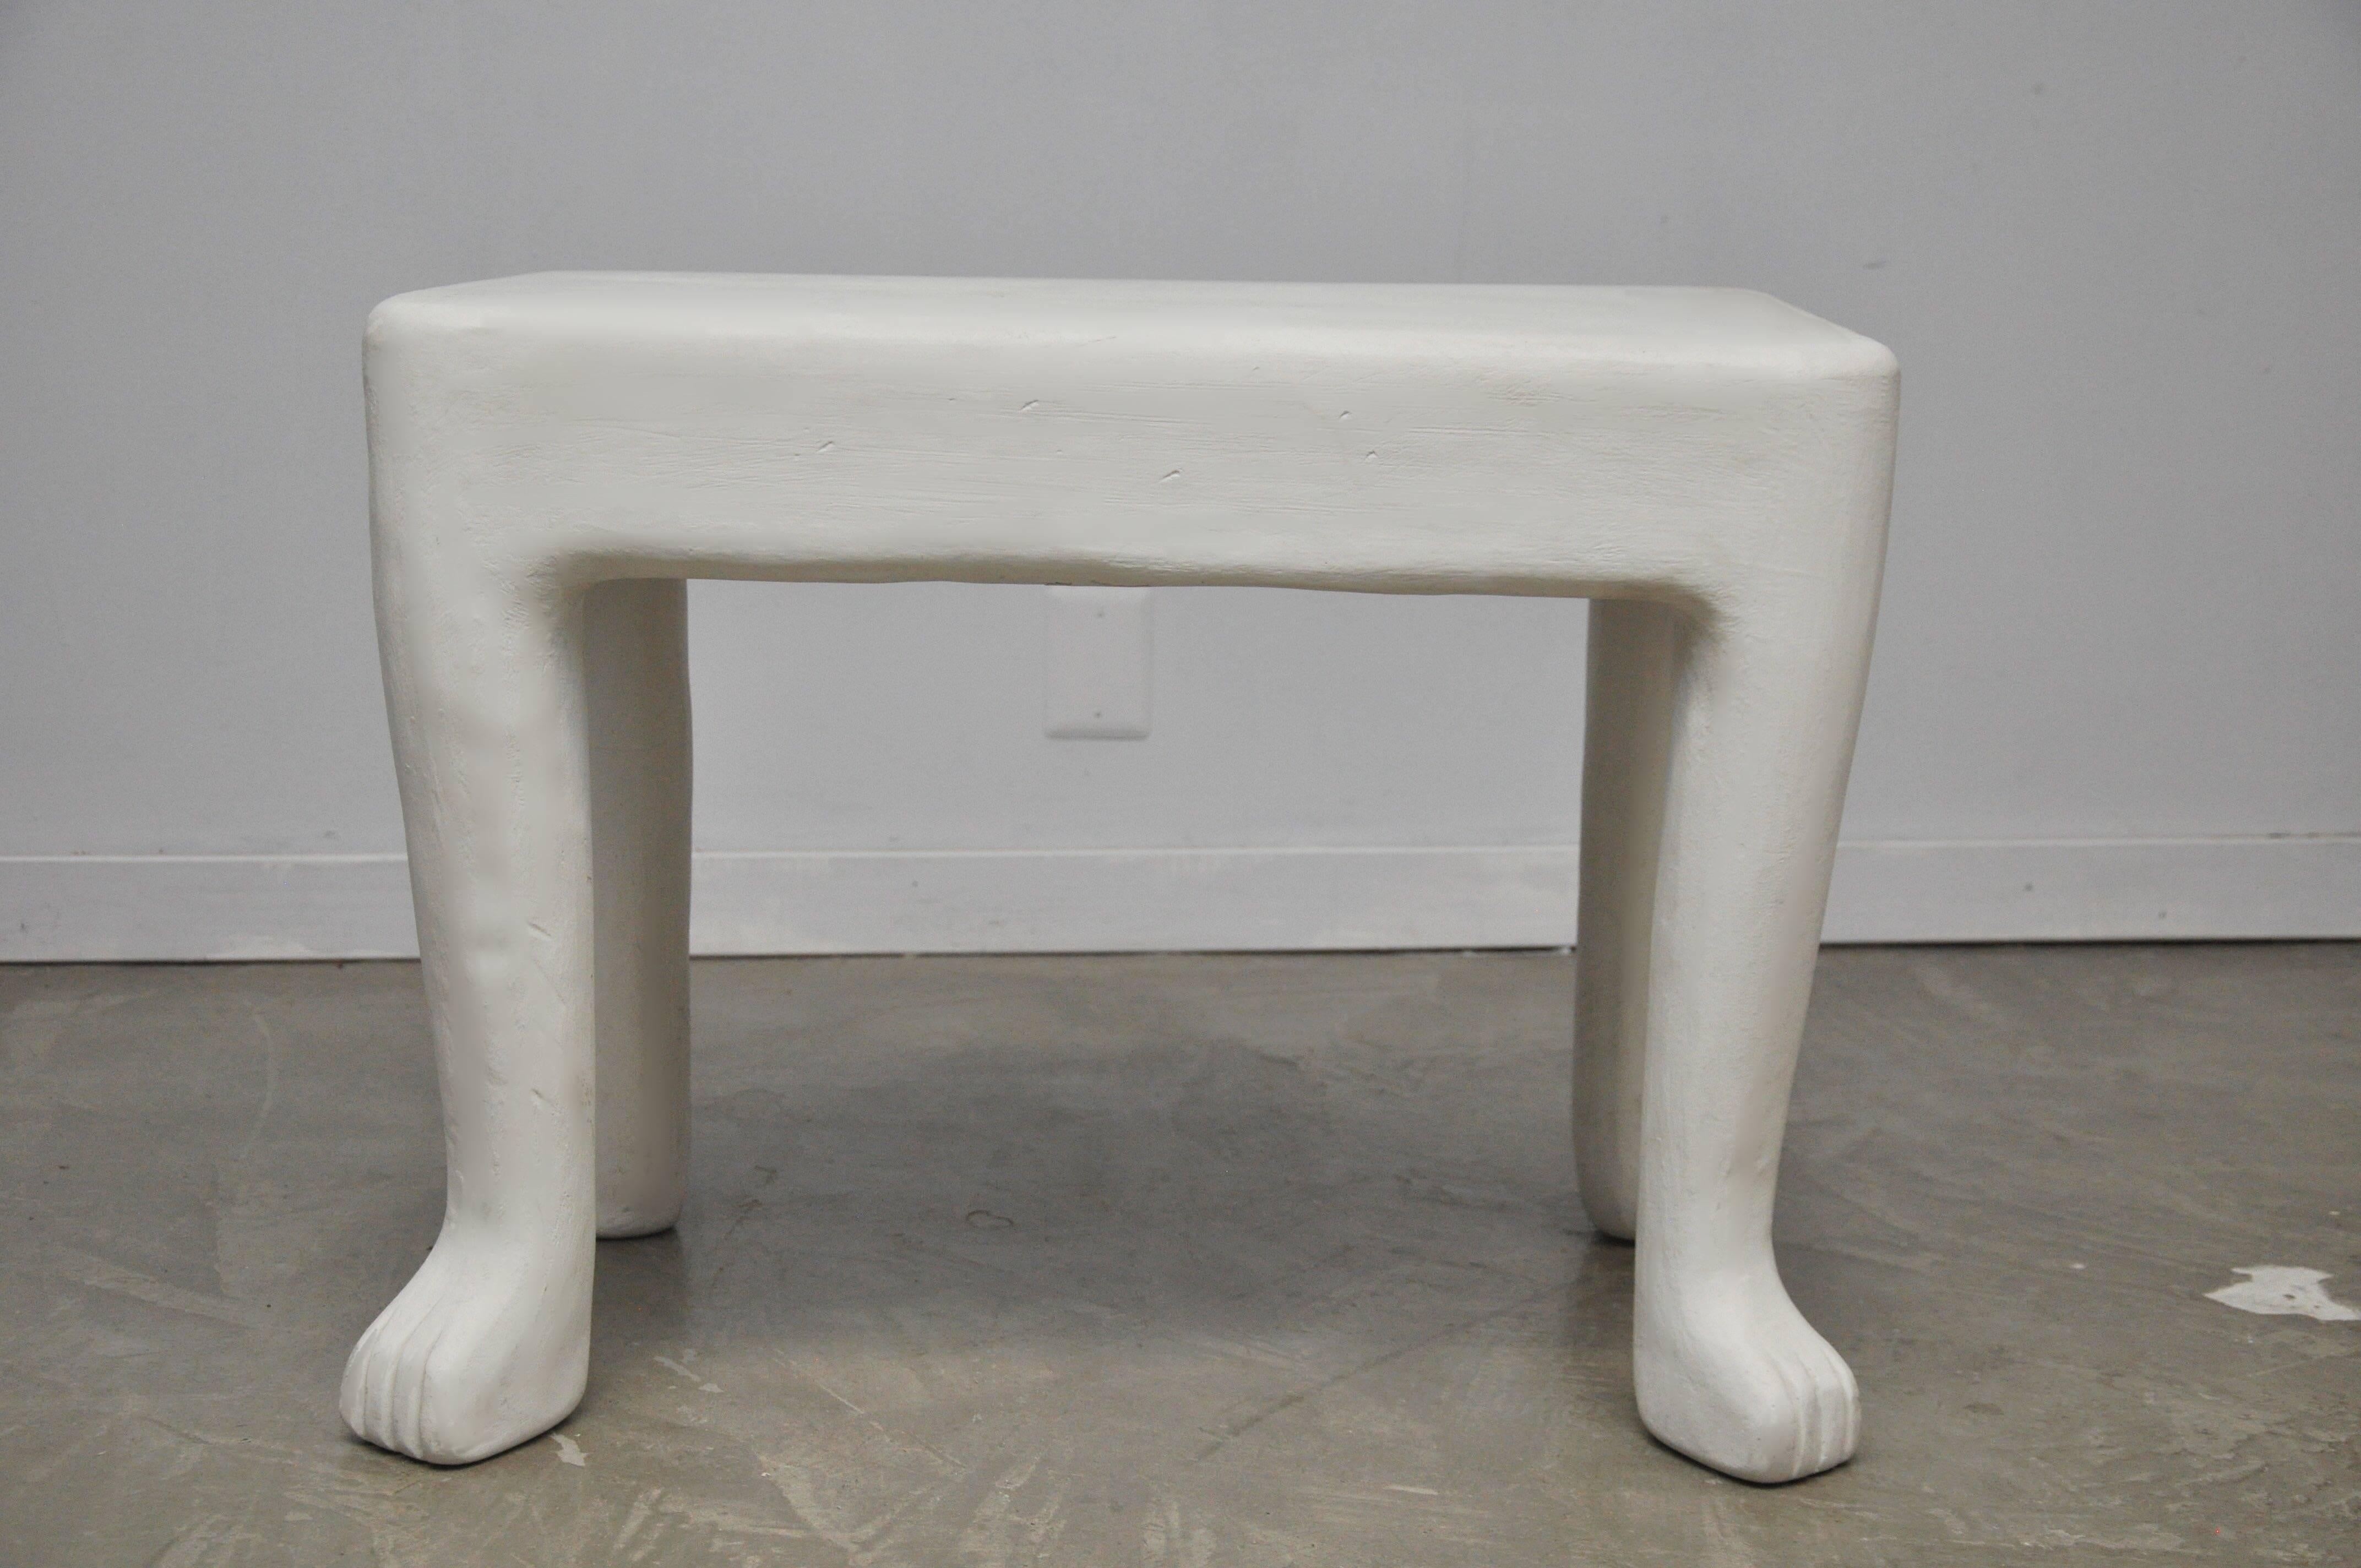 We are proud to offer this authentic white plaster John Dickinson occasional side table. Cast plaster with four primitive animal paw legs. circa 1970s.